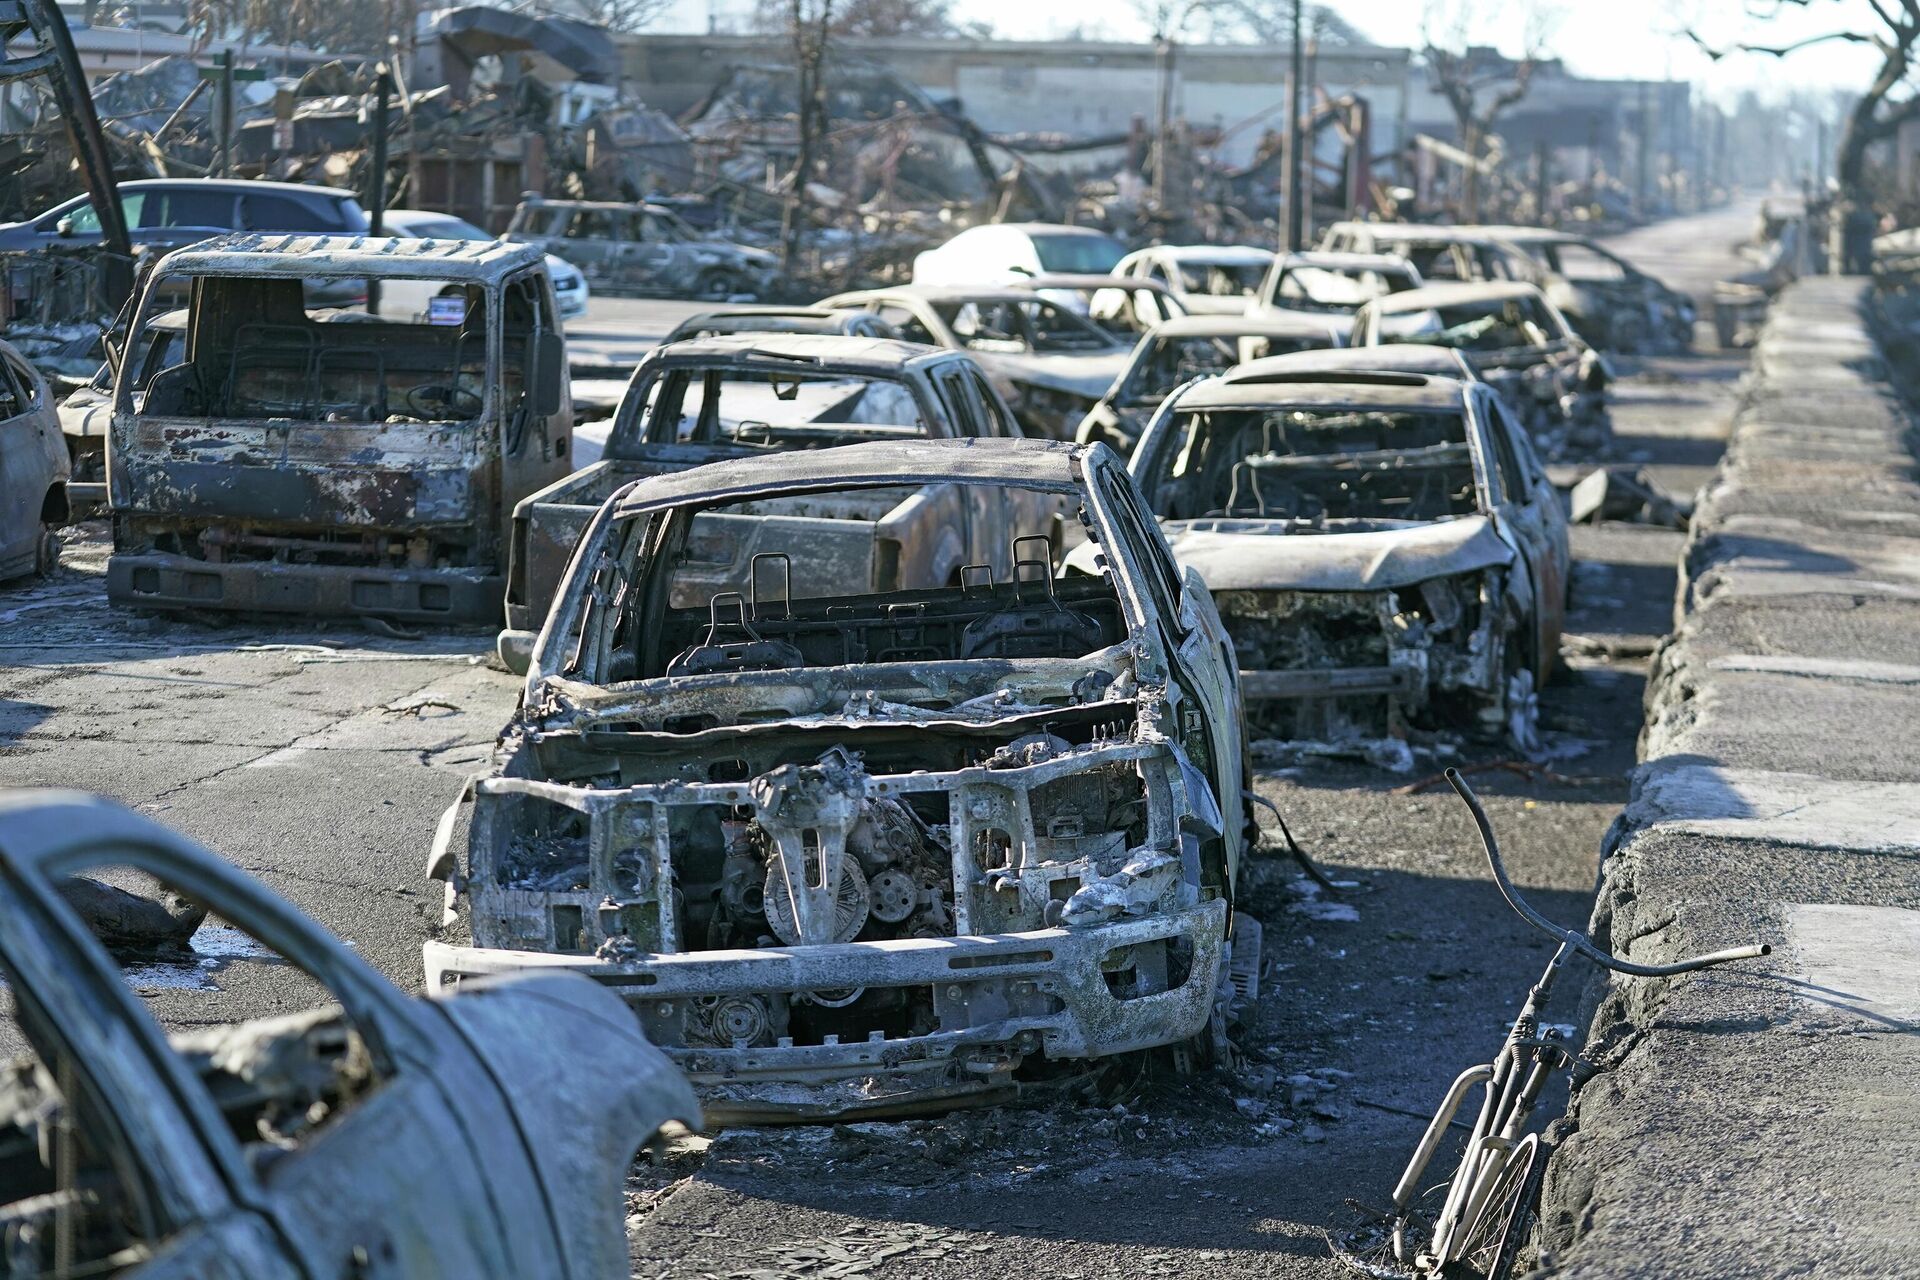 Burnt out cars line the sea walk after the wildfire on Friday, Aug. 11, 2023, in Lahaina, Hawaii. Hawaii emergency management records show no indication that warning sirens sounded before people ran for their lives from wildfires on Maui that killed multiple people and wiped out a historic town. Instead, officials sent alerts to mobile phones, televisions and radio stations — but widespread power and cellular outages may have limited their reach.  - Sputnik International, 1920, 11.08.2023